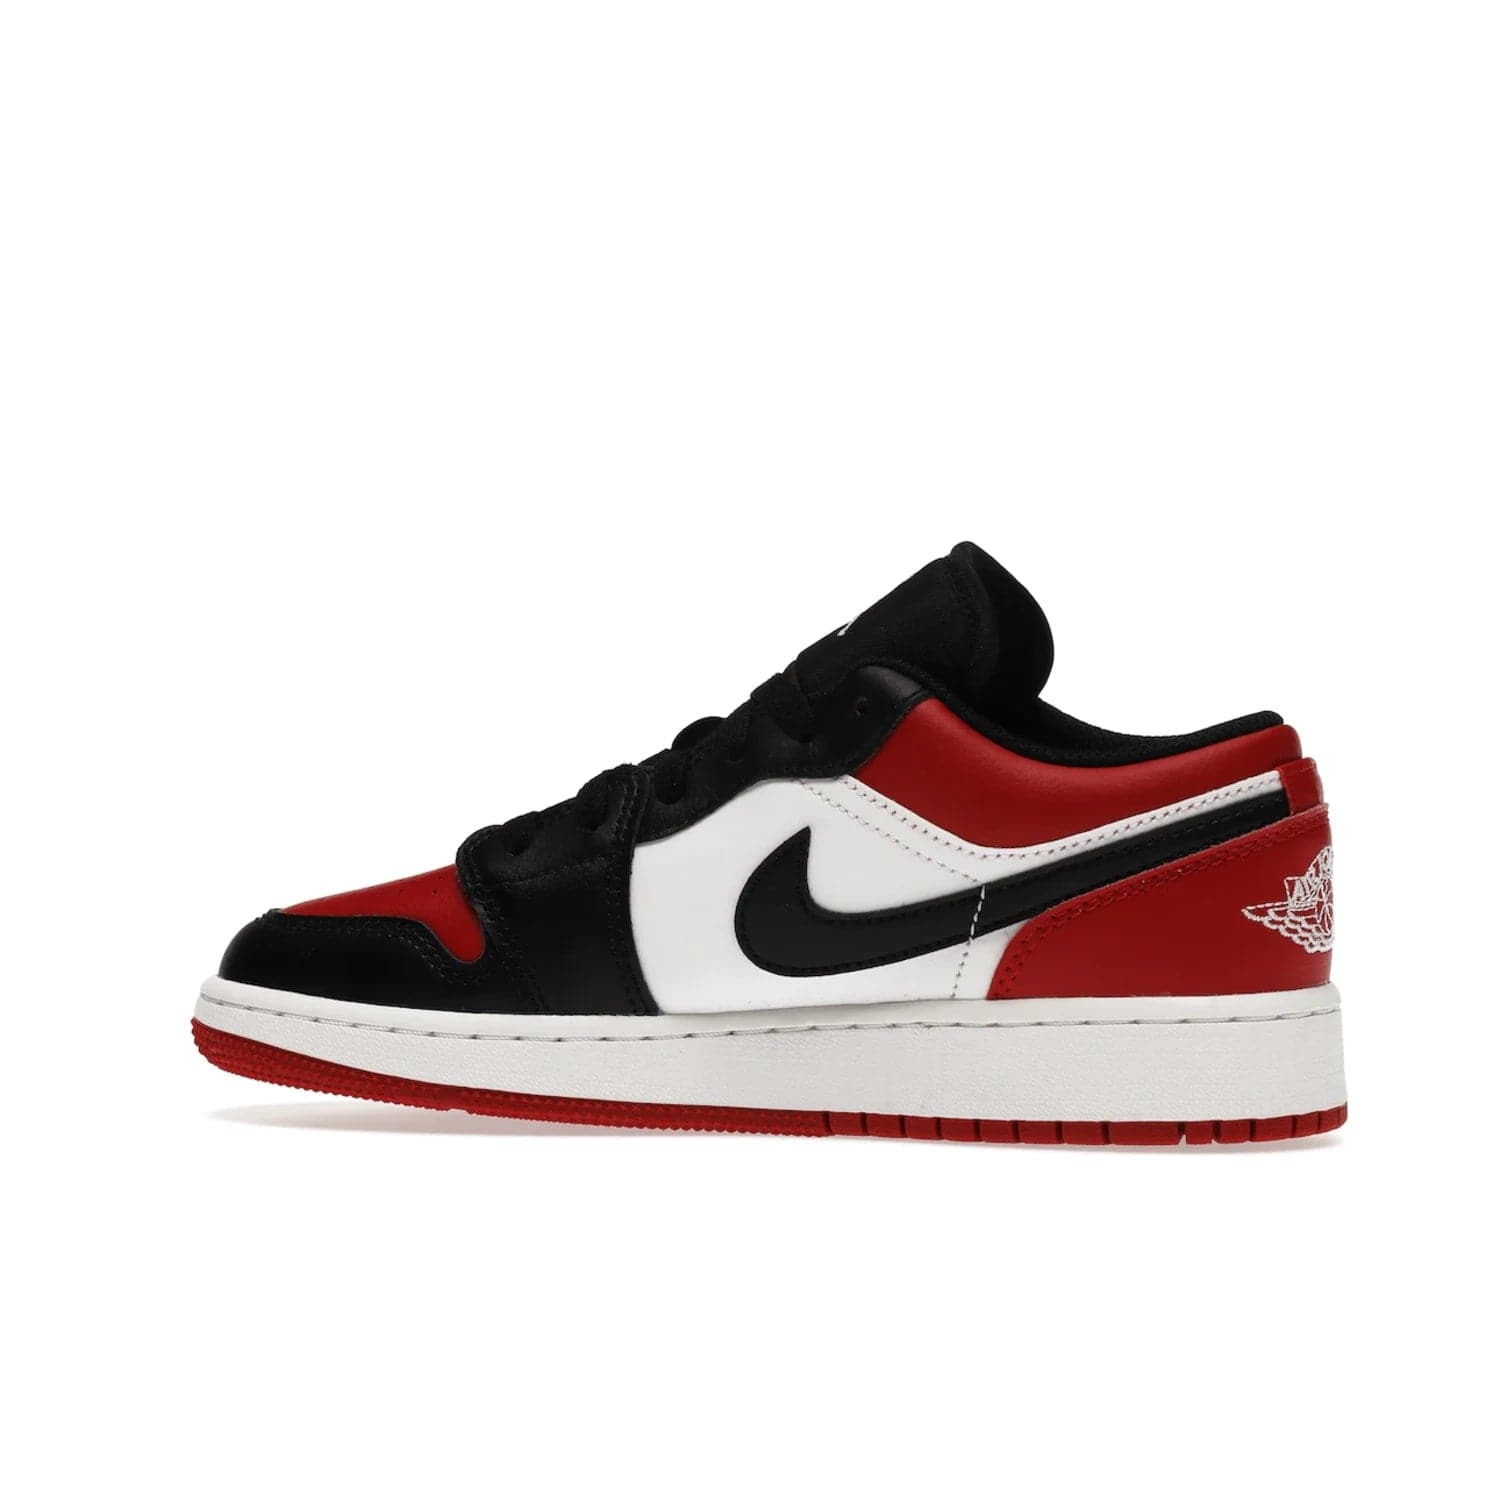 Jordan 1 Low Bred Toe (GS) - Image 21 - Only at www.BallersClubKickz.com - #
Iconic sneaker from Jordan brand with classic colorway, unique detailing & Air Jordan Wings logo. Step into the shoes of the greats with the Jordan 1 Low Bred Toe GS!